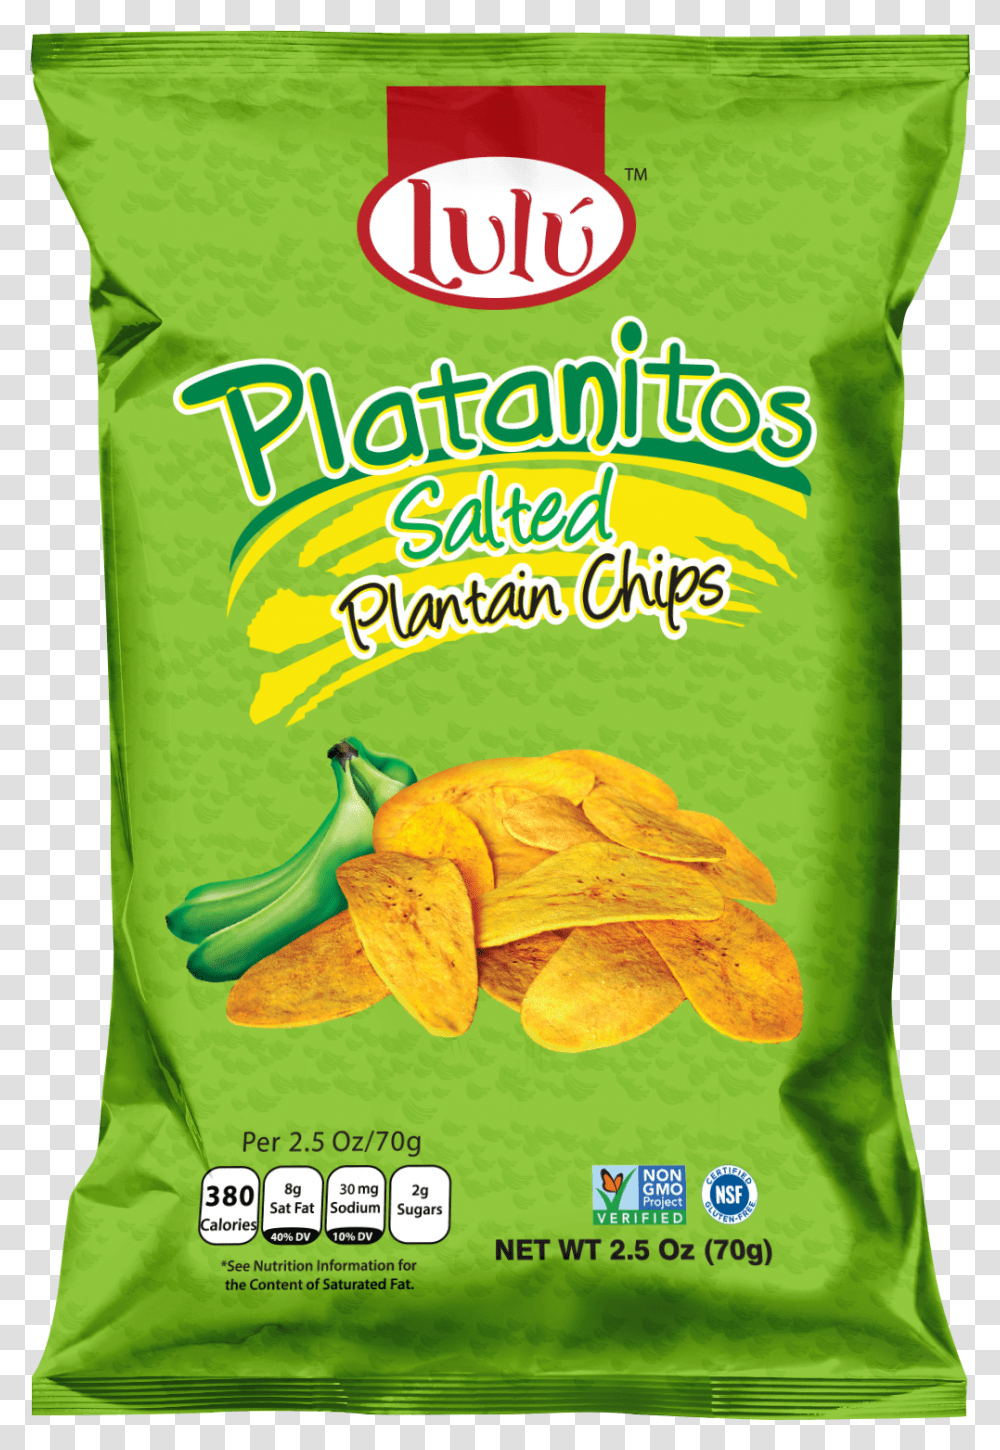 Plantainchips Lulu Plantain Chips Salted, Banana, Fruit, Food, Snack Transparent Png